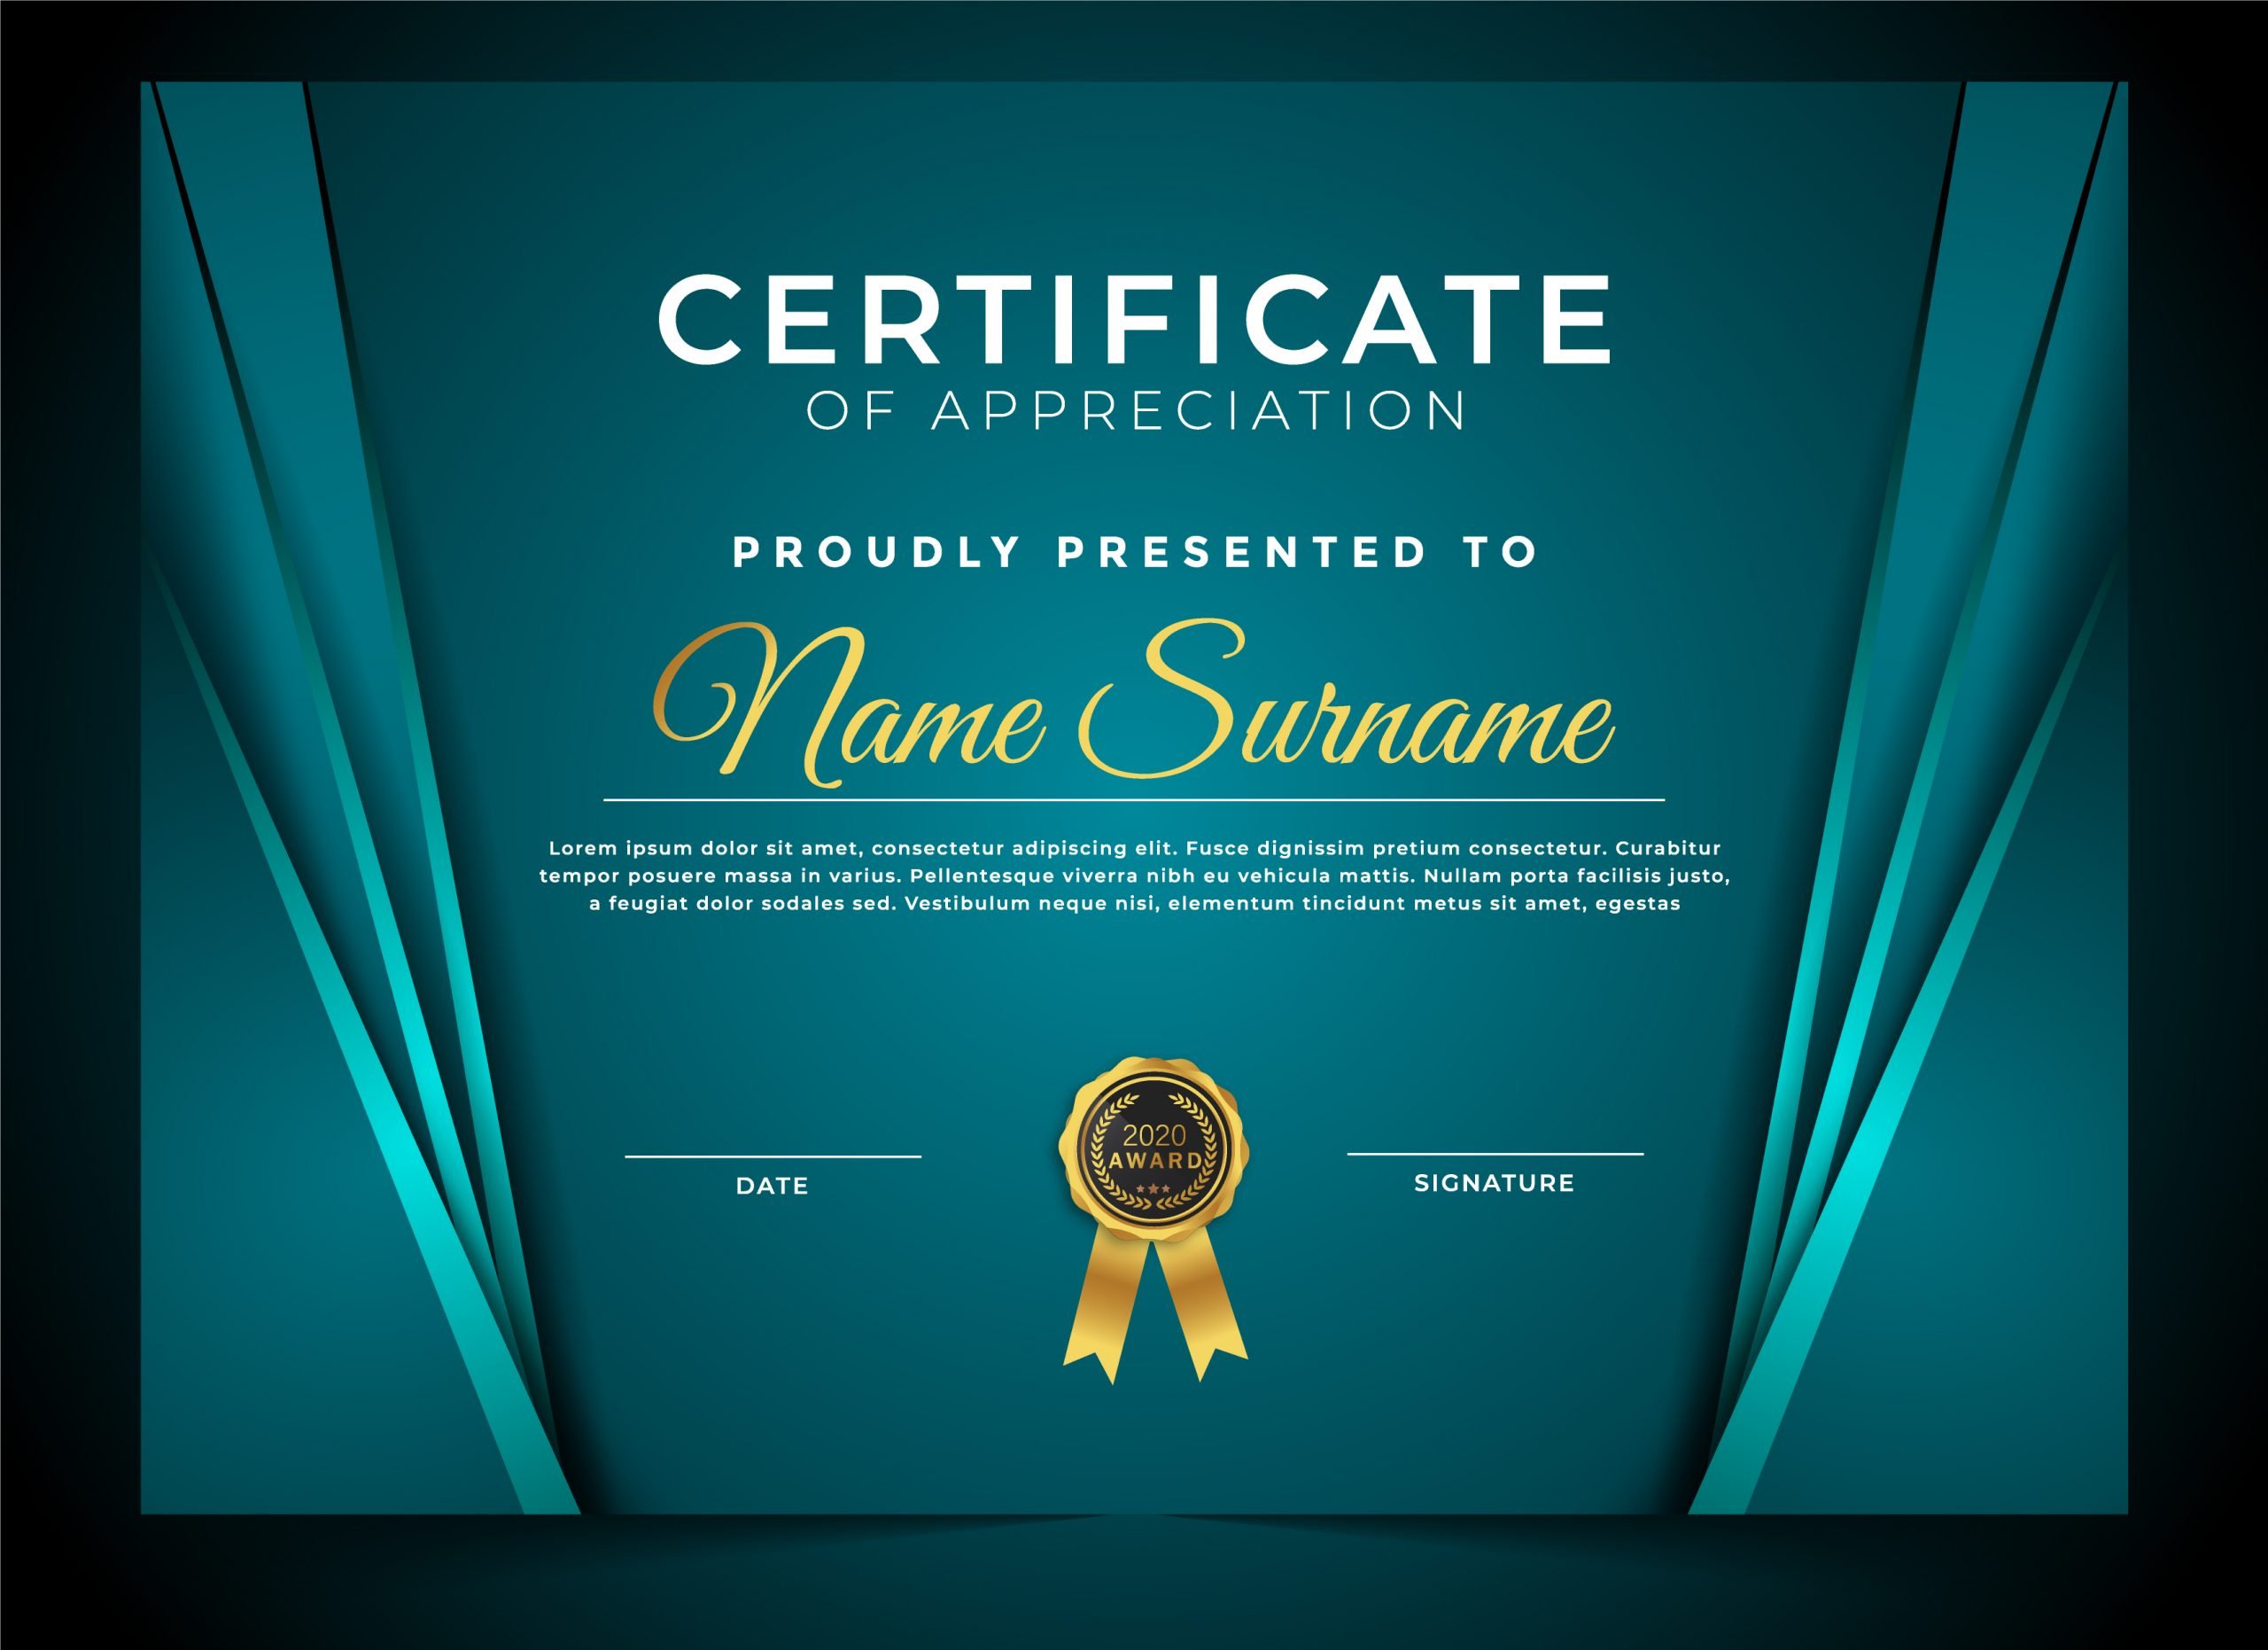 Printable Award Of Honor Certificate Template For Word - Bank2home.com